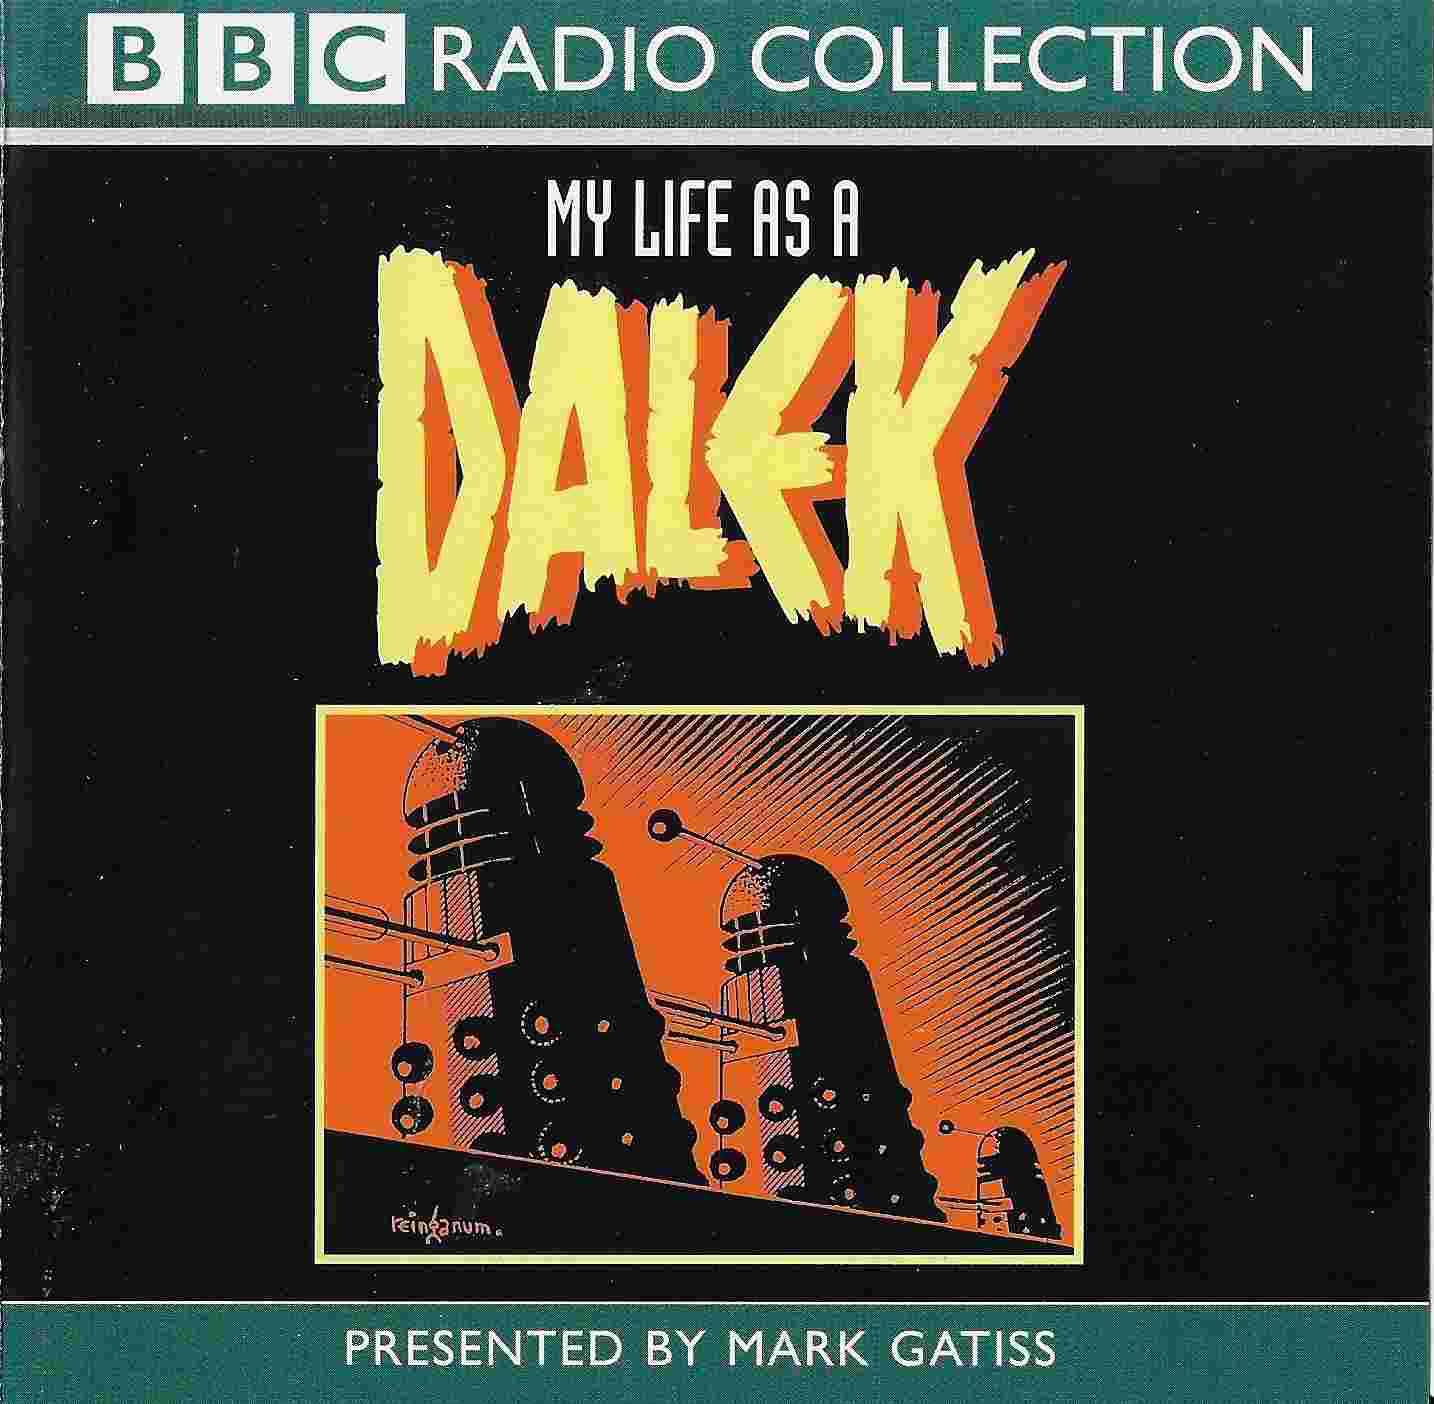 Picture of ISBN 0-563-49476-X3 Doctor Who - My Life as a Dalek by artist Mark Gatiss from the BBC cds - Records and Tapes library